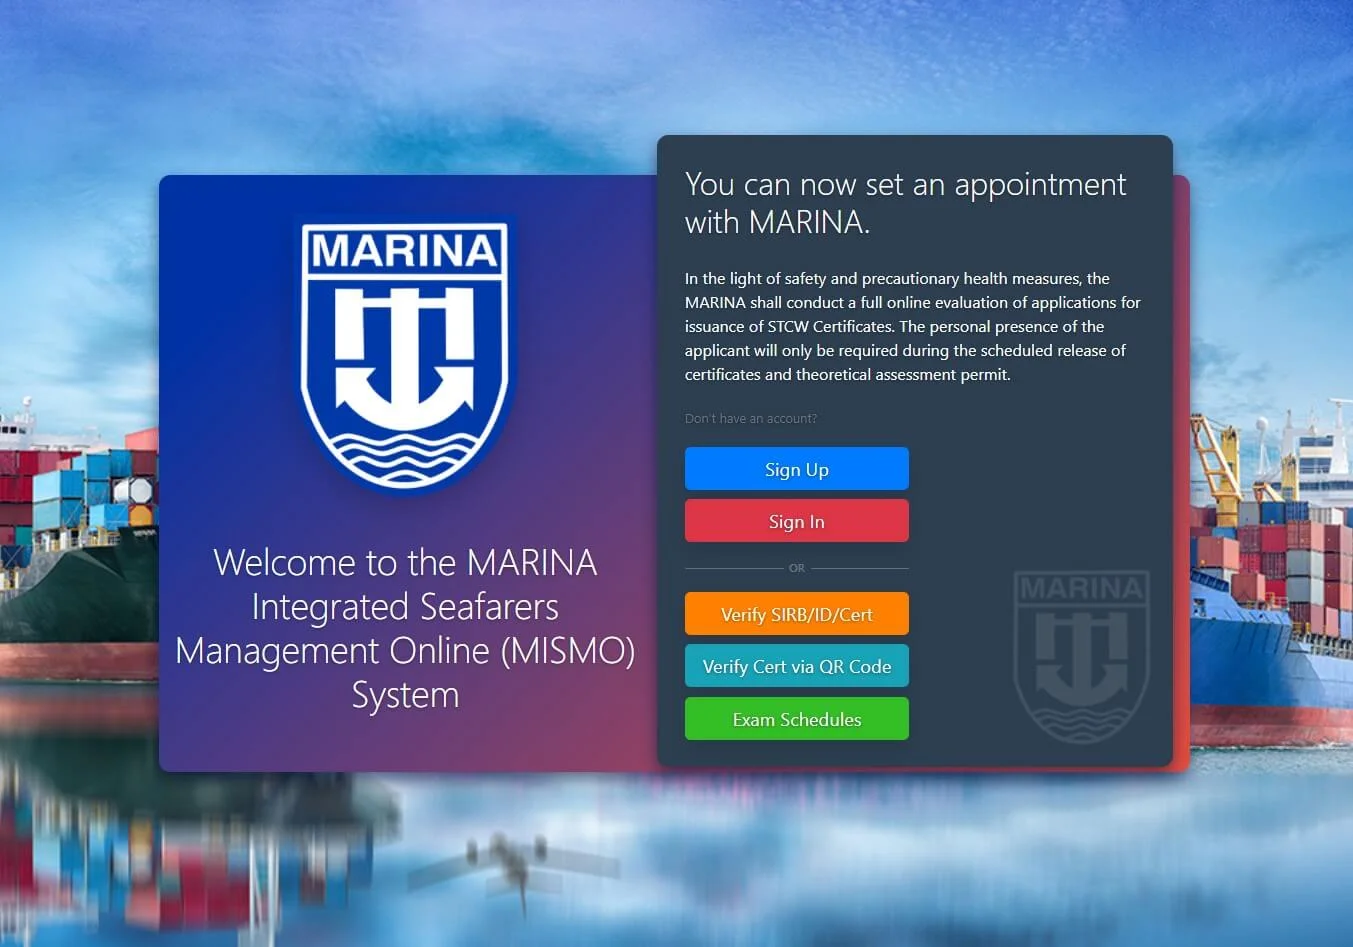 MARINA Integrated Seafarers Management Online (MISMO) System